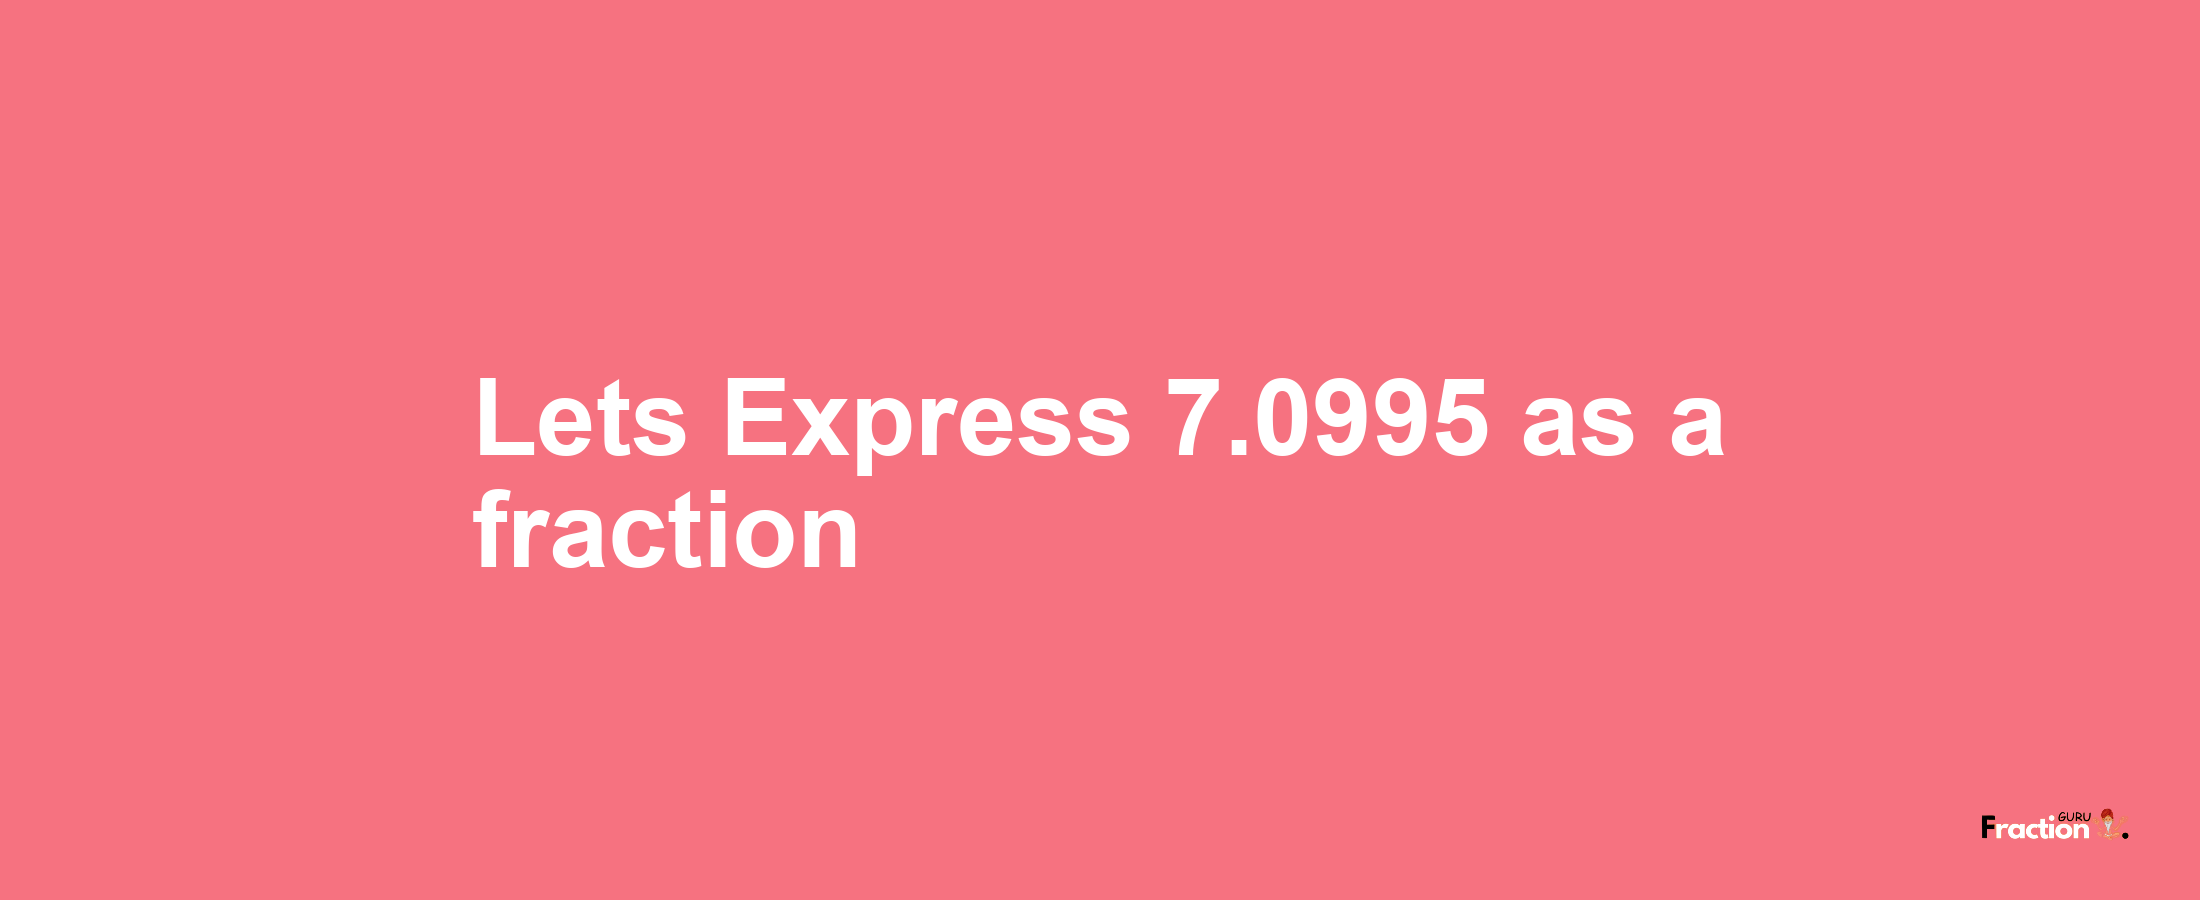 Lets Express 7.0995 as afraction